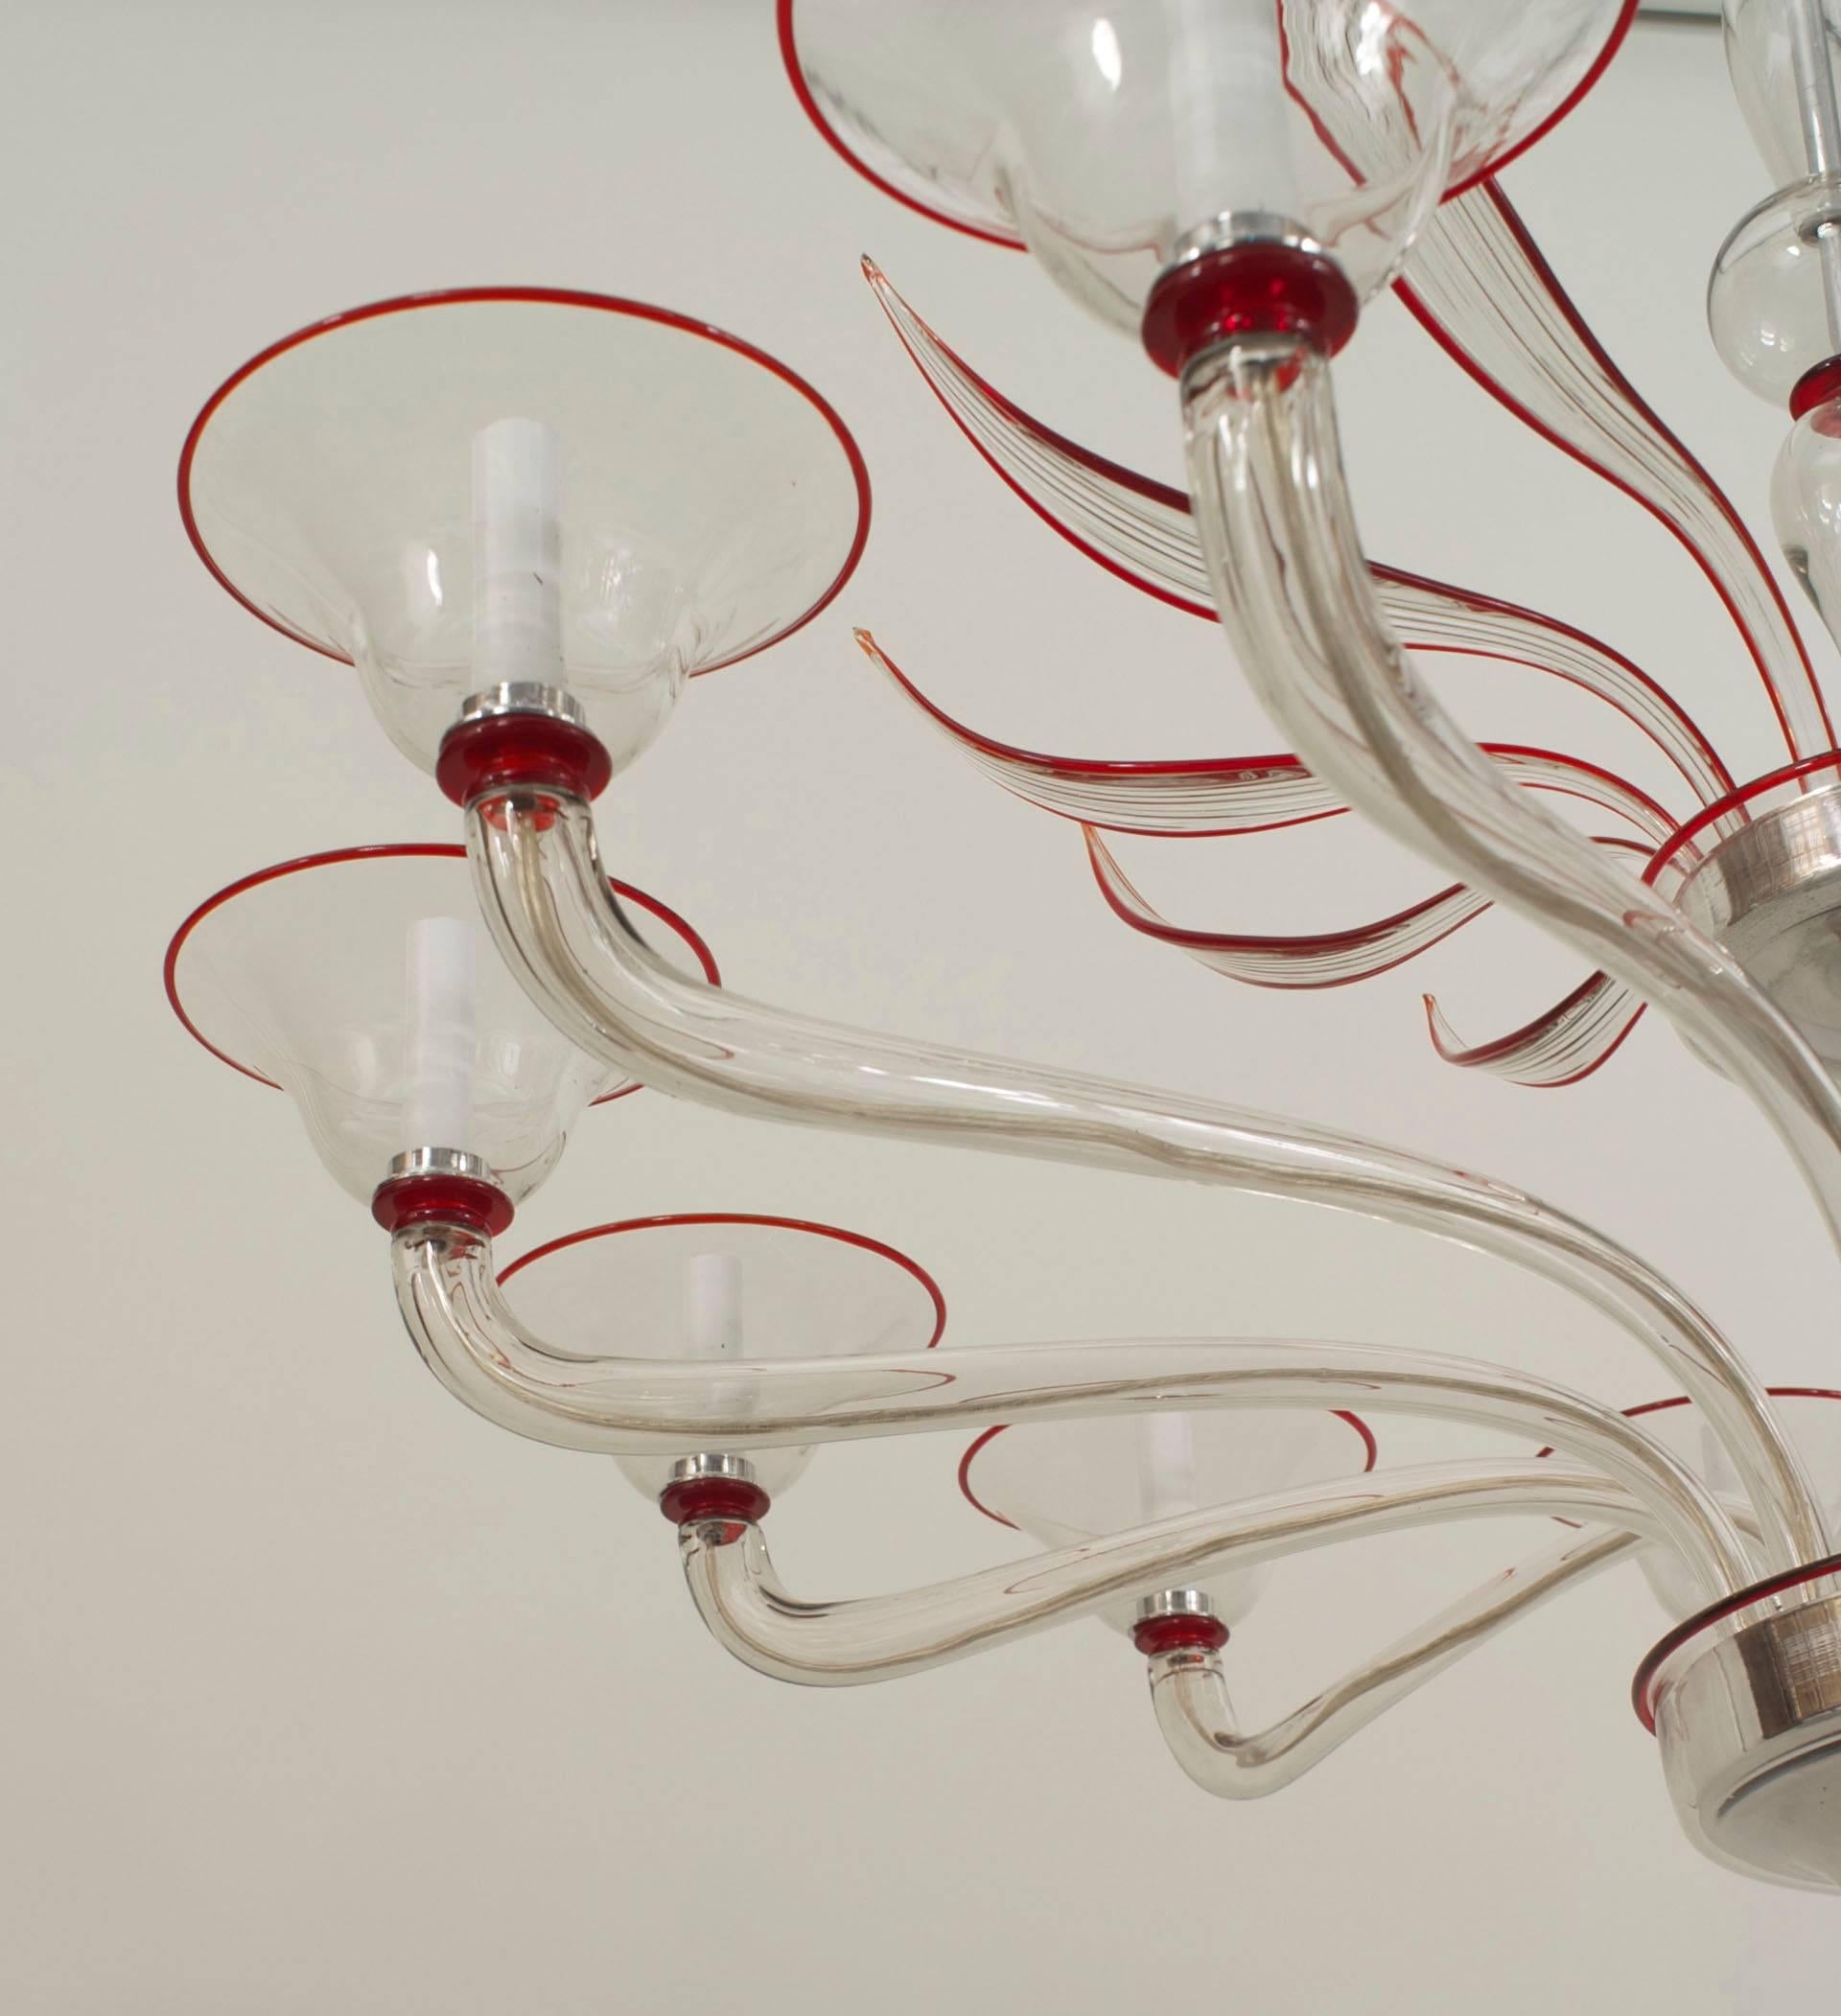 Italian Venetian-Style Murano (1940s) clear glass and red trimmed chandelier with 12 scroll arms under a tier of 12 feathers emanating from a center shaft with a final bottom.
